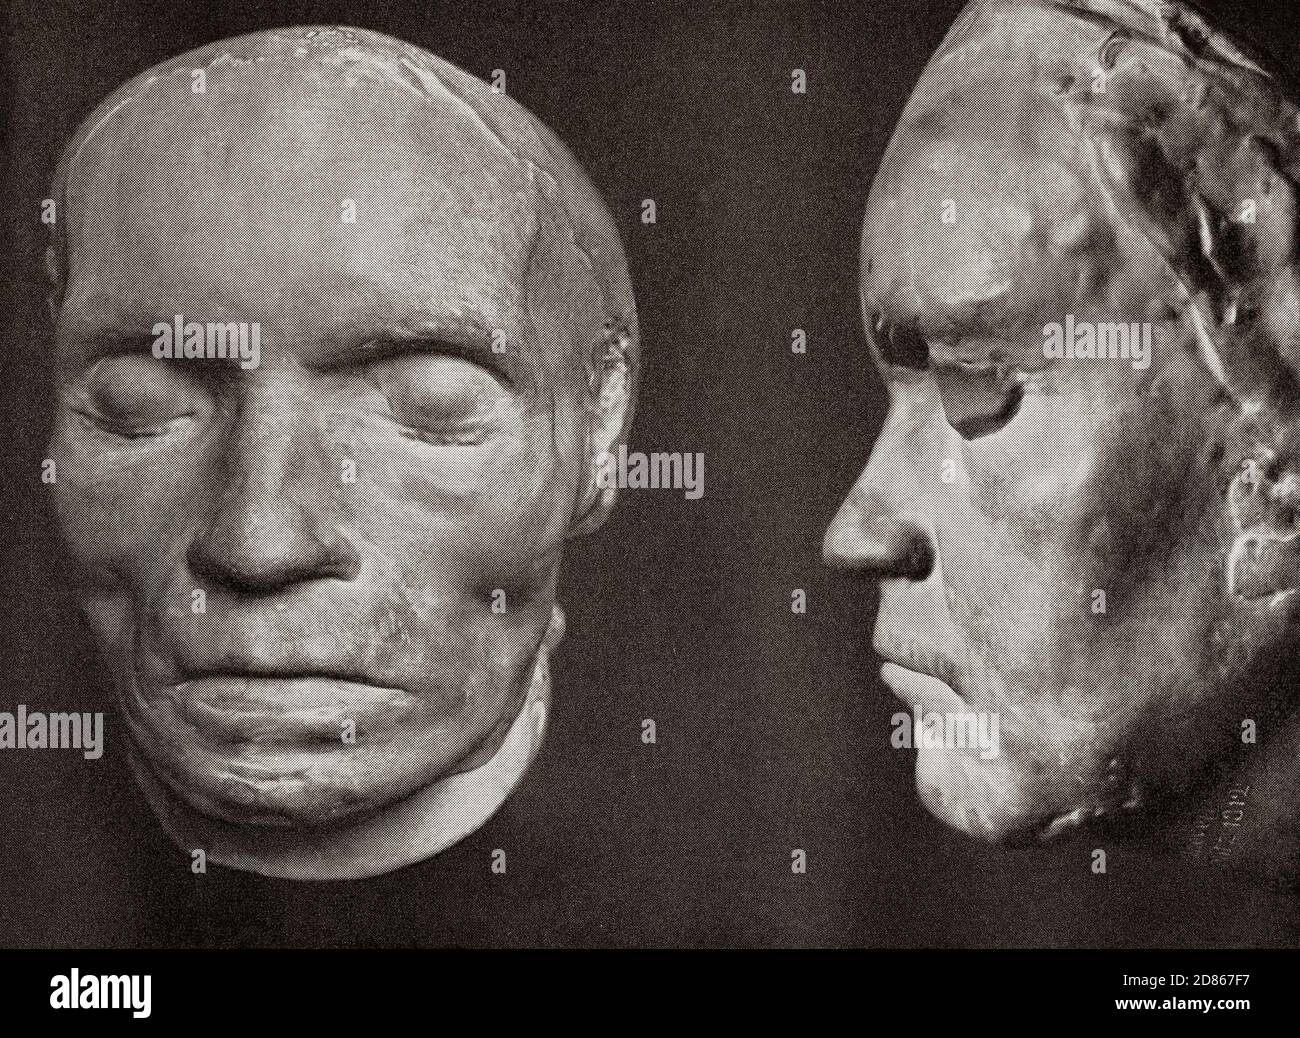 The death mask of Beethoven, molded by Josef Danhauser around twelve hours after Beethoven's death.  Ludwig van Beethoven, 1770 – 1827. German composer and pianist. From Ludwig van Beethoven, 1770 - 1827, Sein Leben in Bildern (His Life in Pictures) Stock Photo